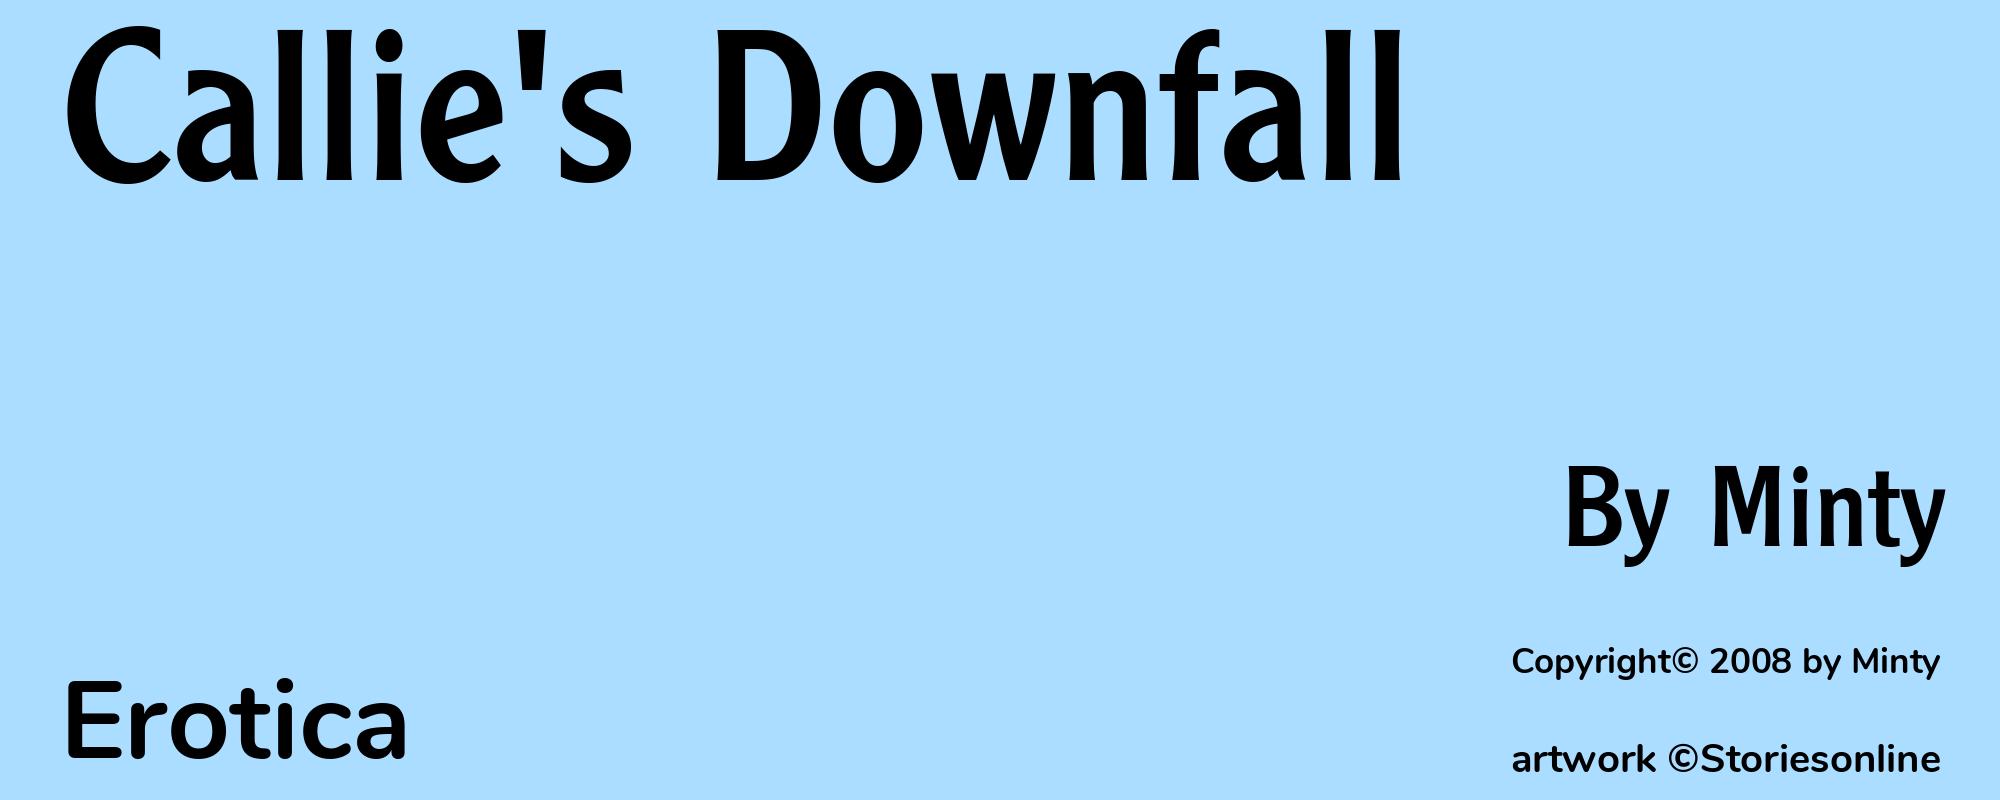 Callie's Downfall - Cover